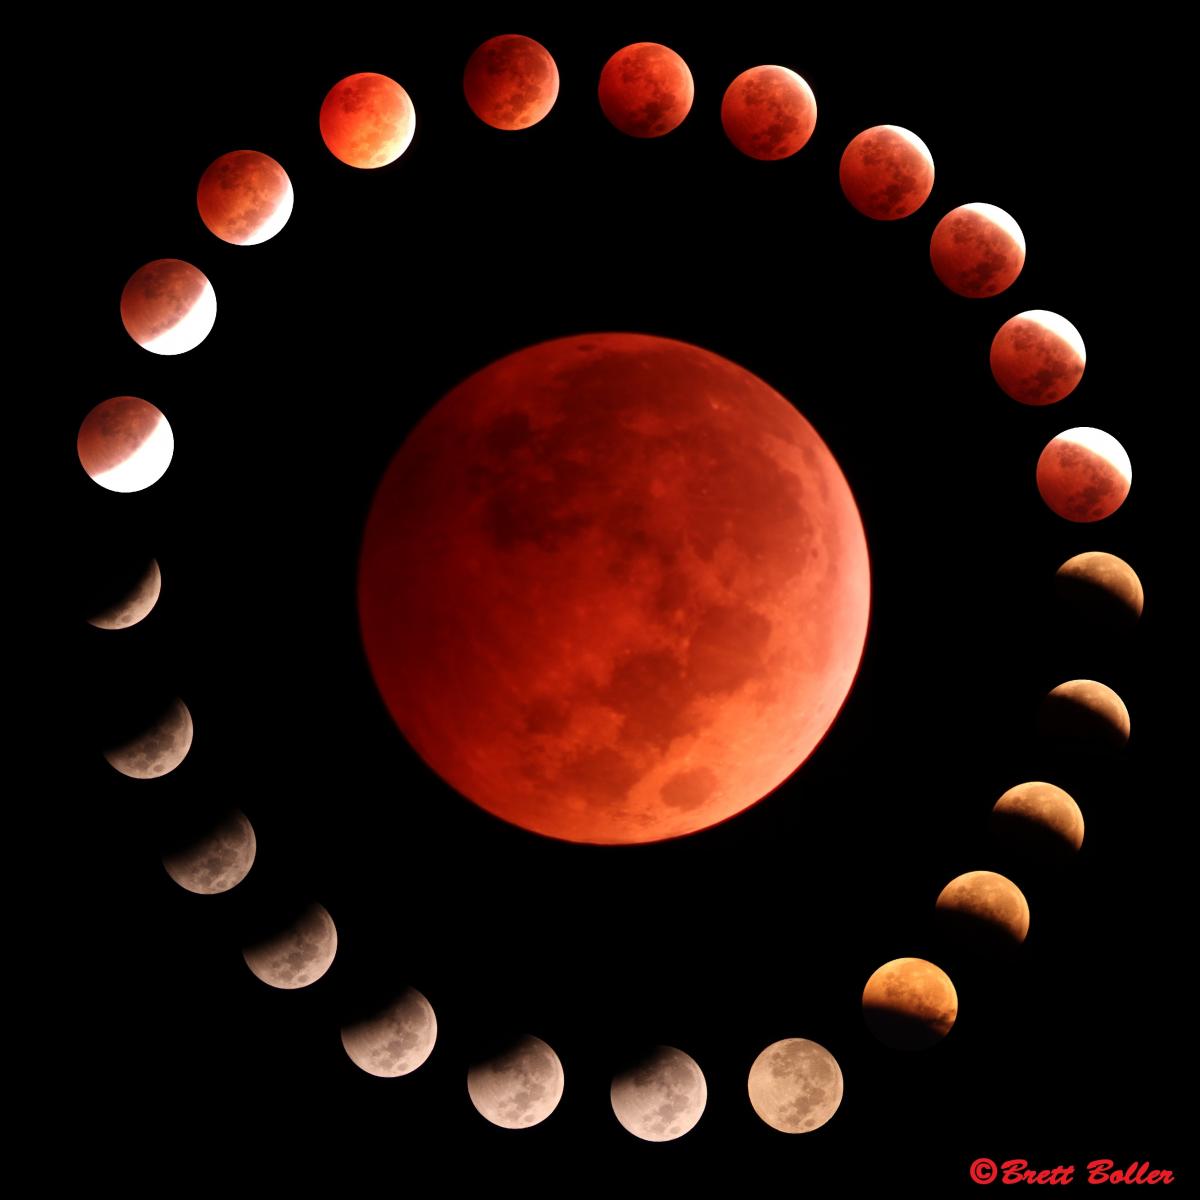 Timelapse of the lunar eclipse stages